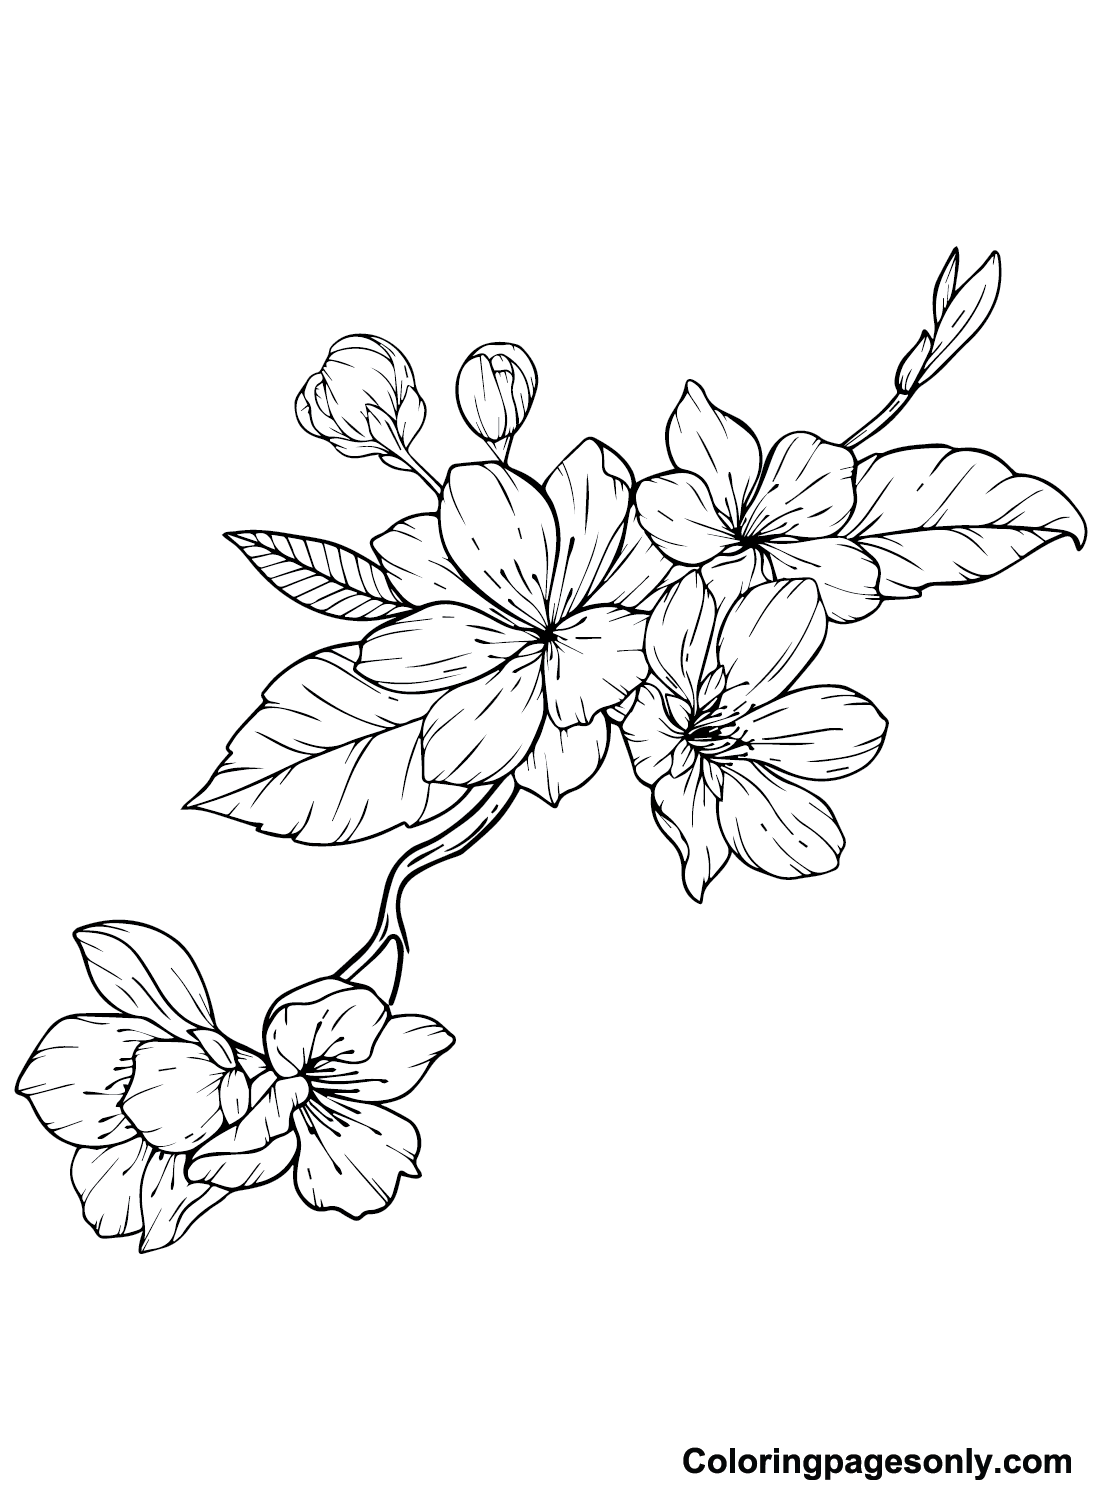 White Cherry Blossom Coloring Page